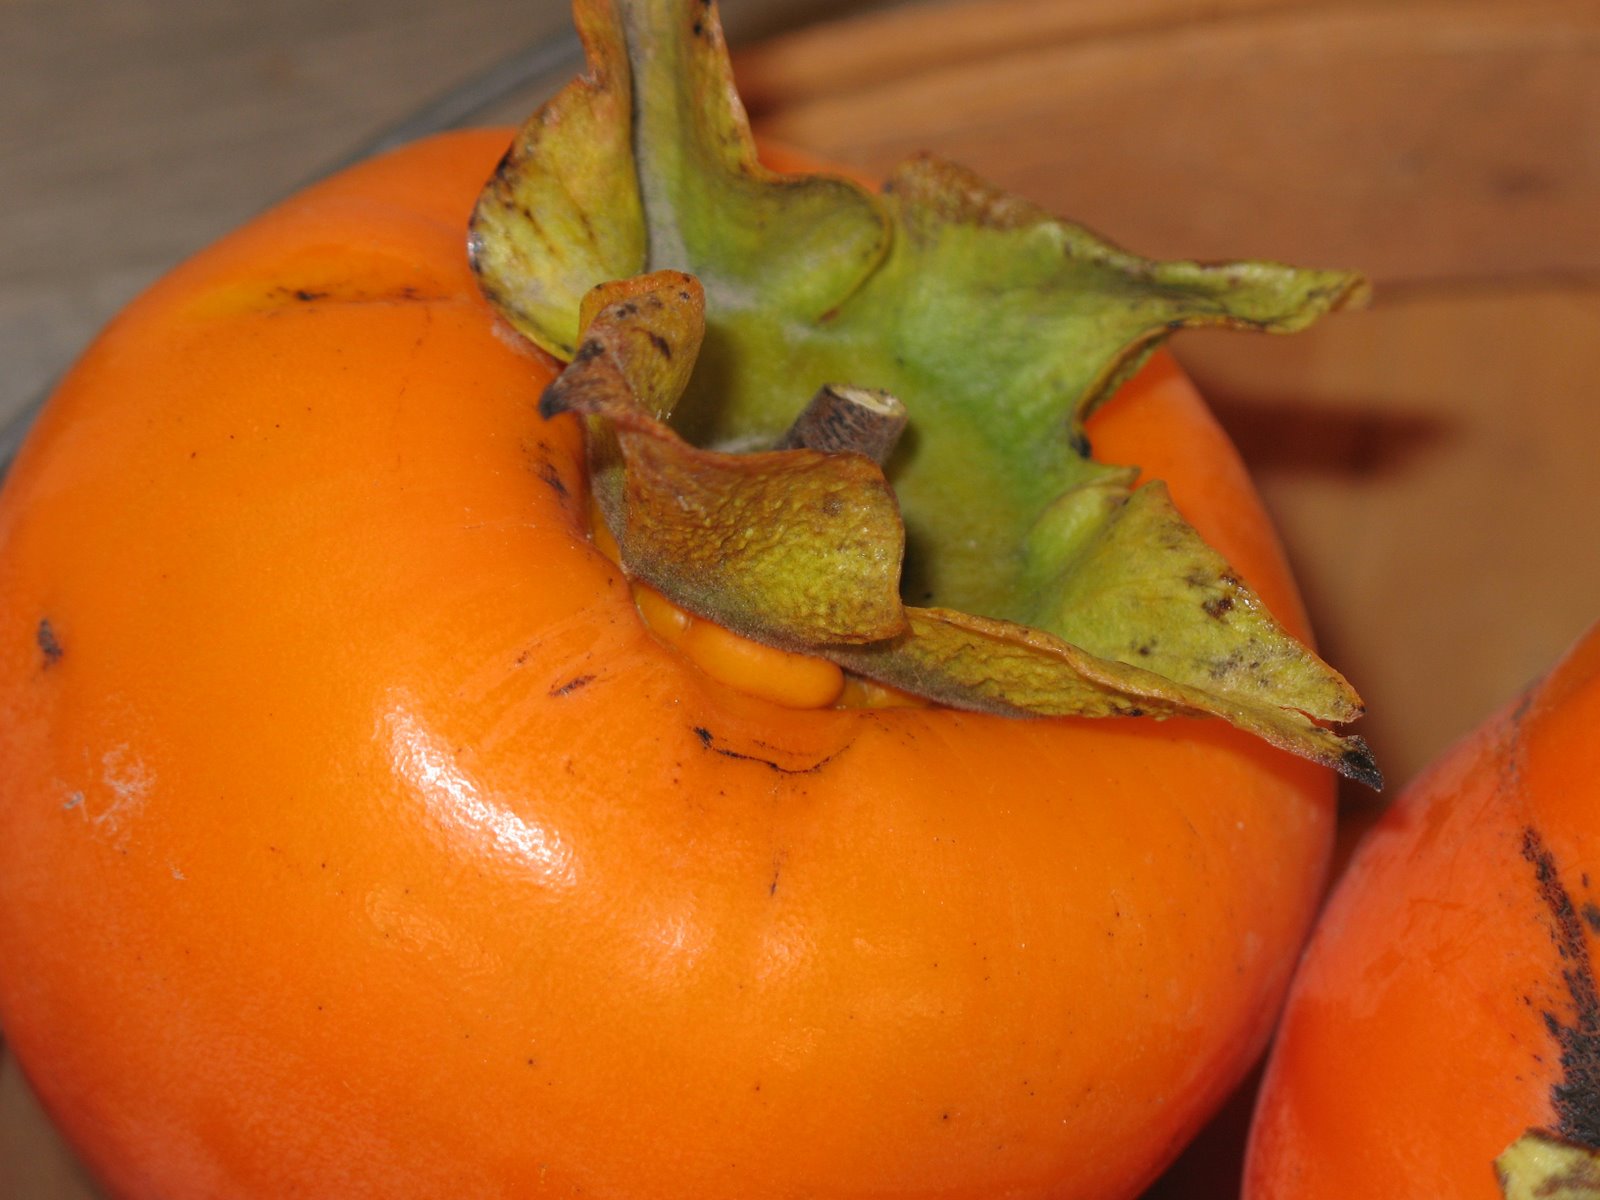 [persimmon+large+and+close+11-06.jpg]